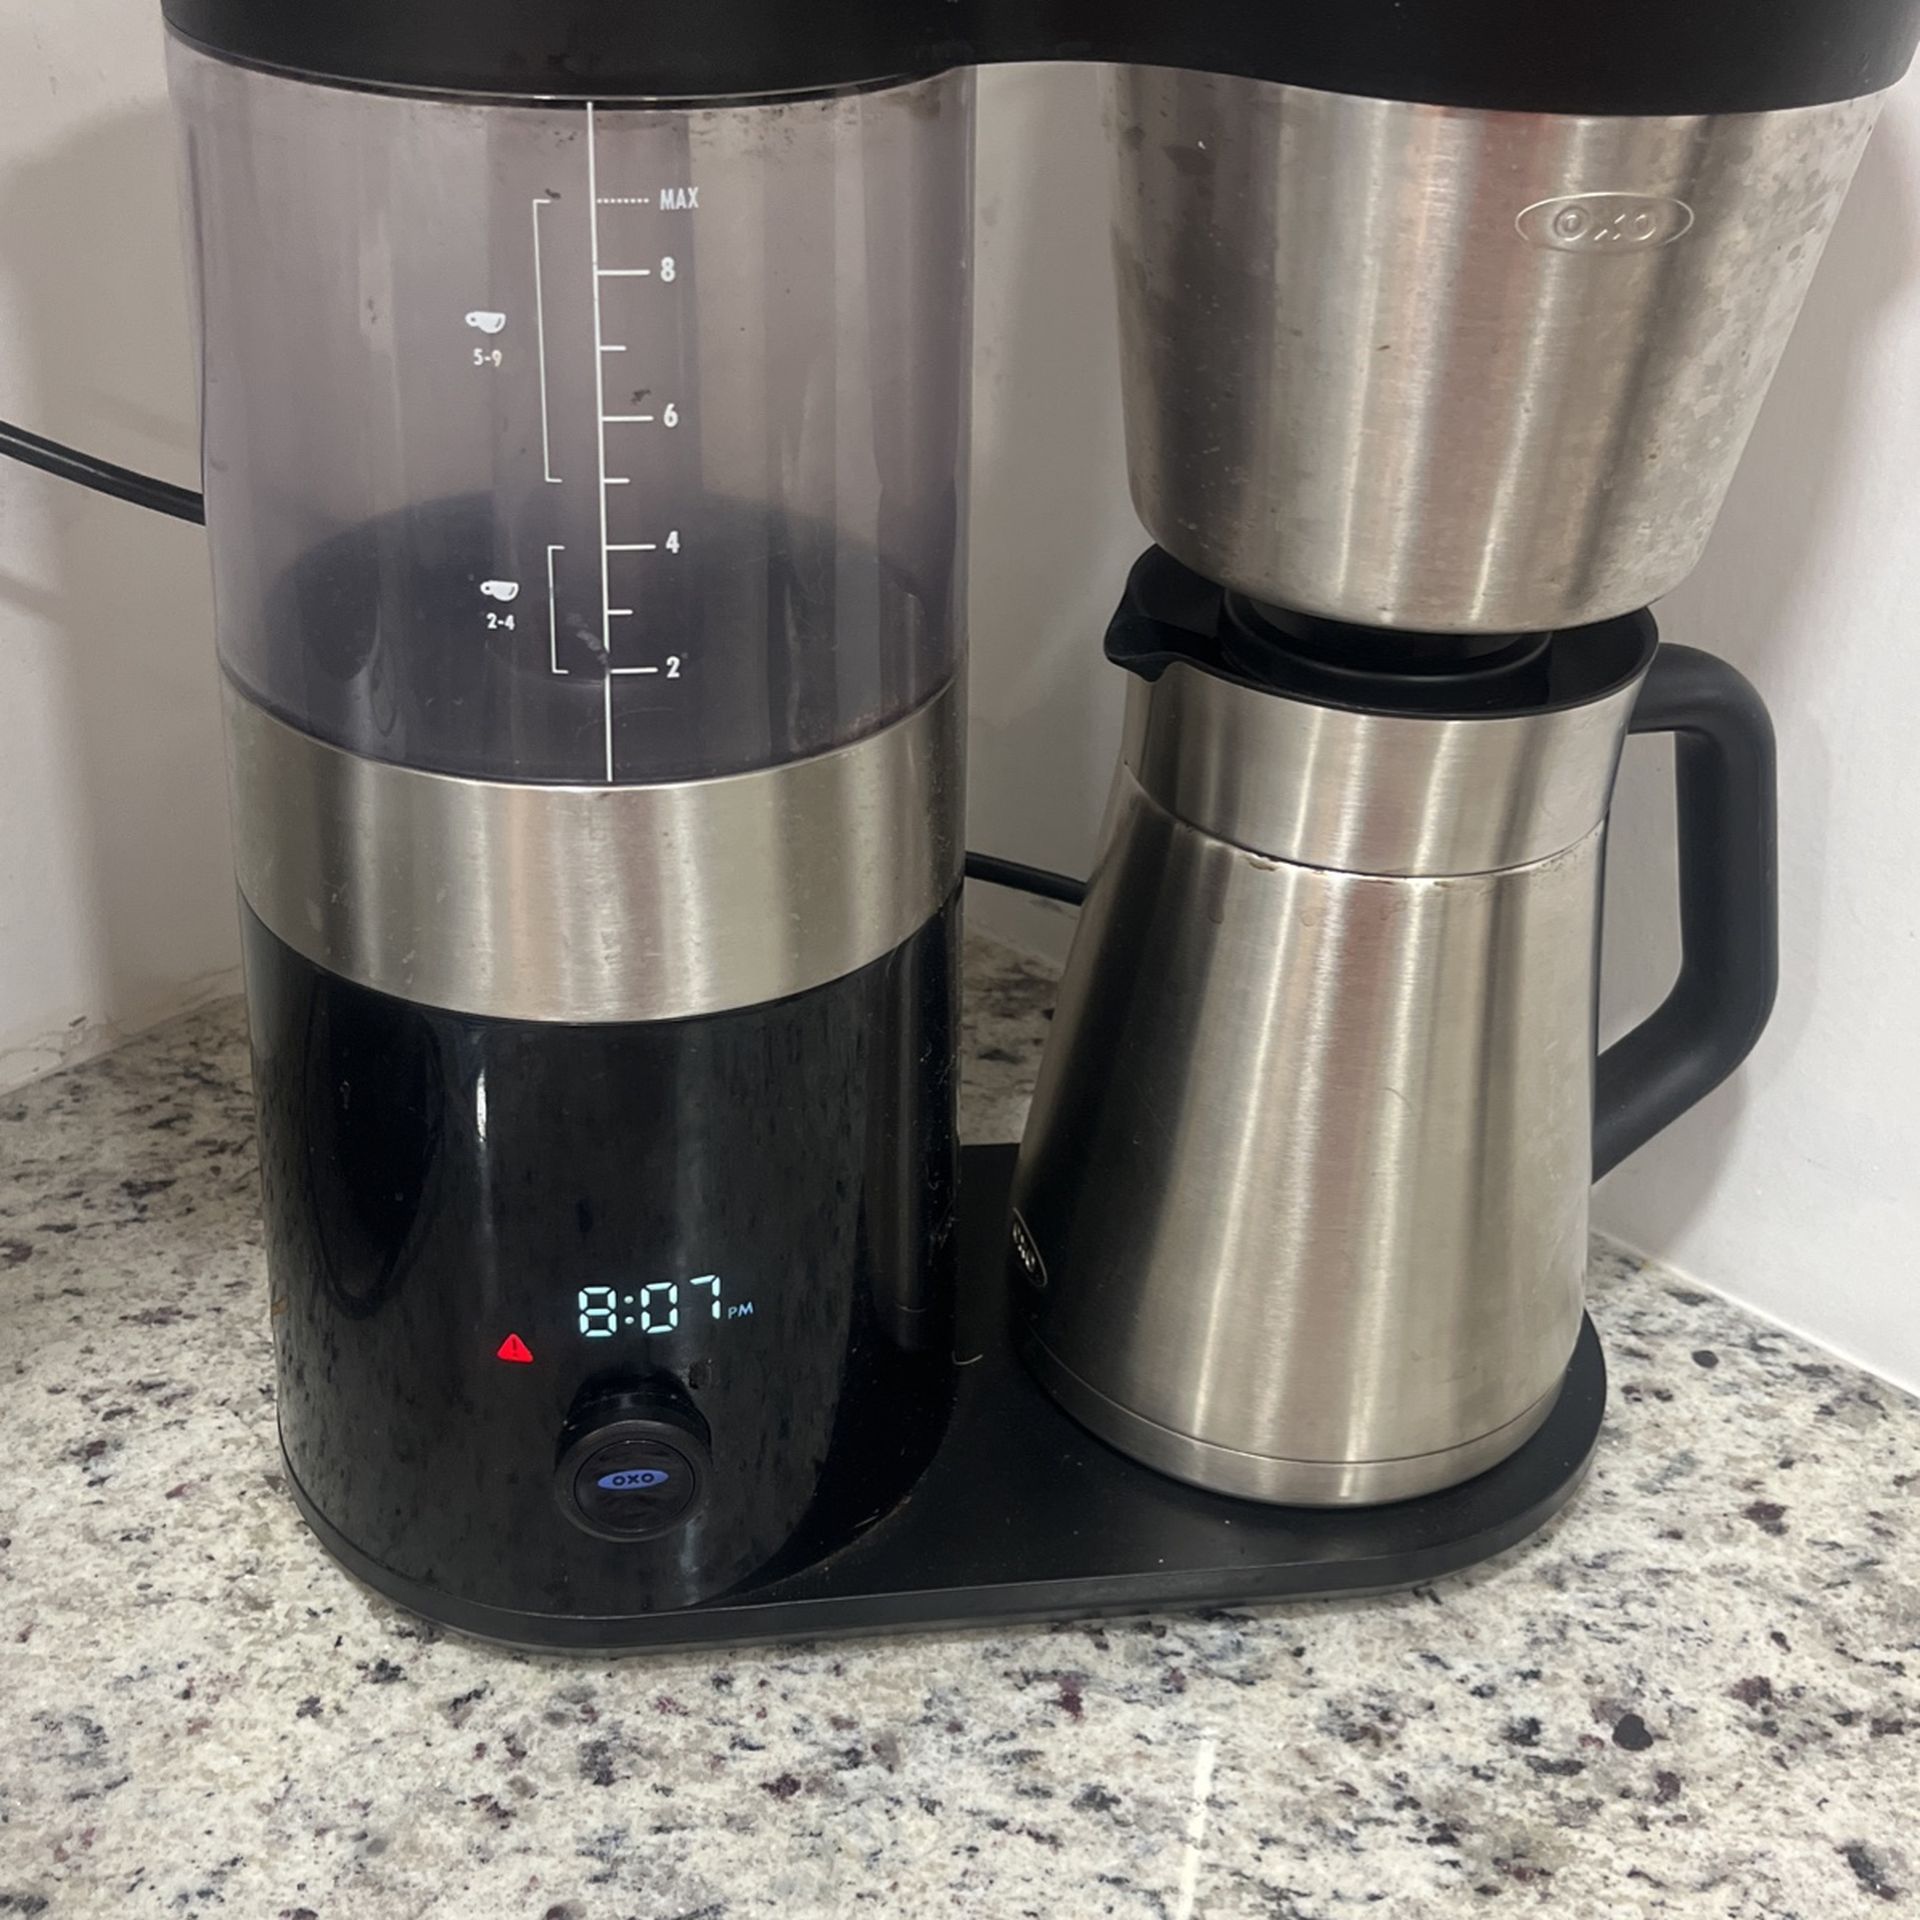 “GREAT OXO STAINLESS STEEL COFFEE MACHINE”